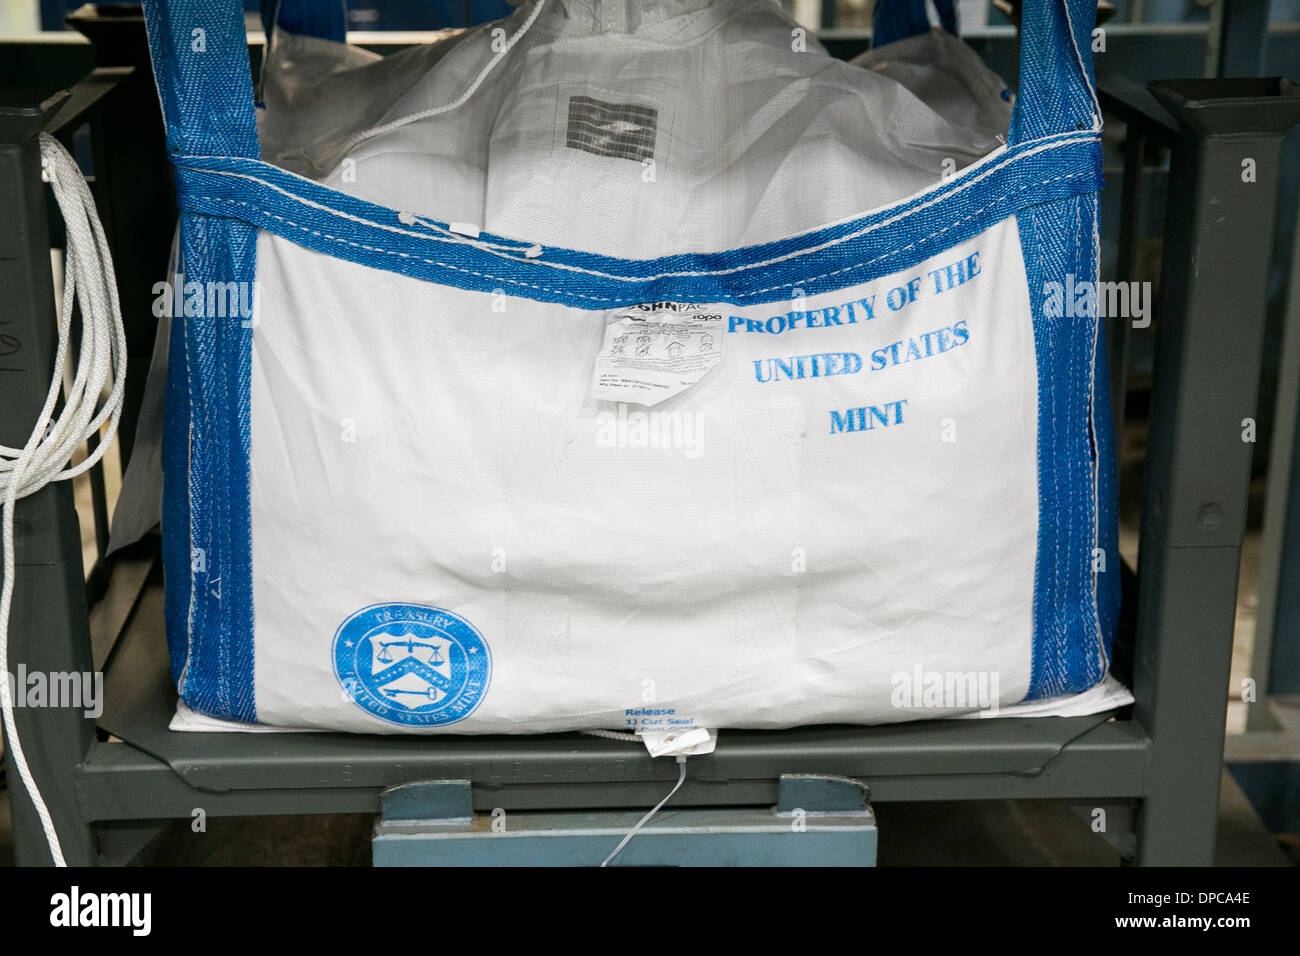 1 ton bags of coins at the Philadelphia branch of the United States Mint.  Stock Photo